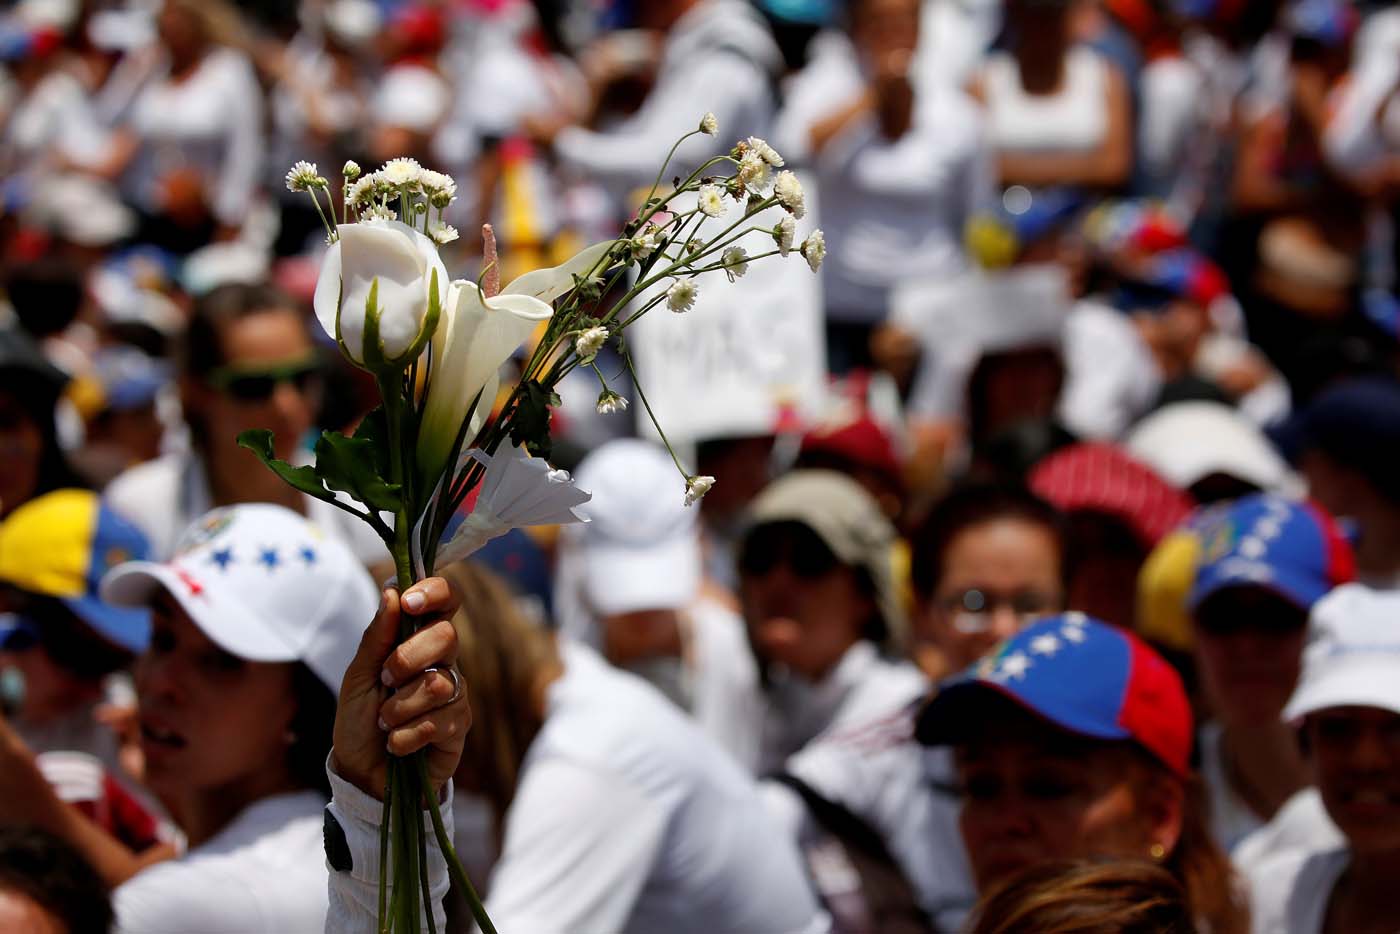 A demonstrator holds up flowers during a women's march to protest against President Nicolas Maduro's government in Caracas, Venezuela, May 6, 2017. REUTERS/Carlos Garcia Rawlins